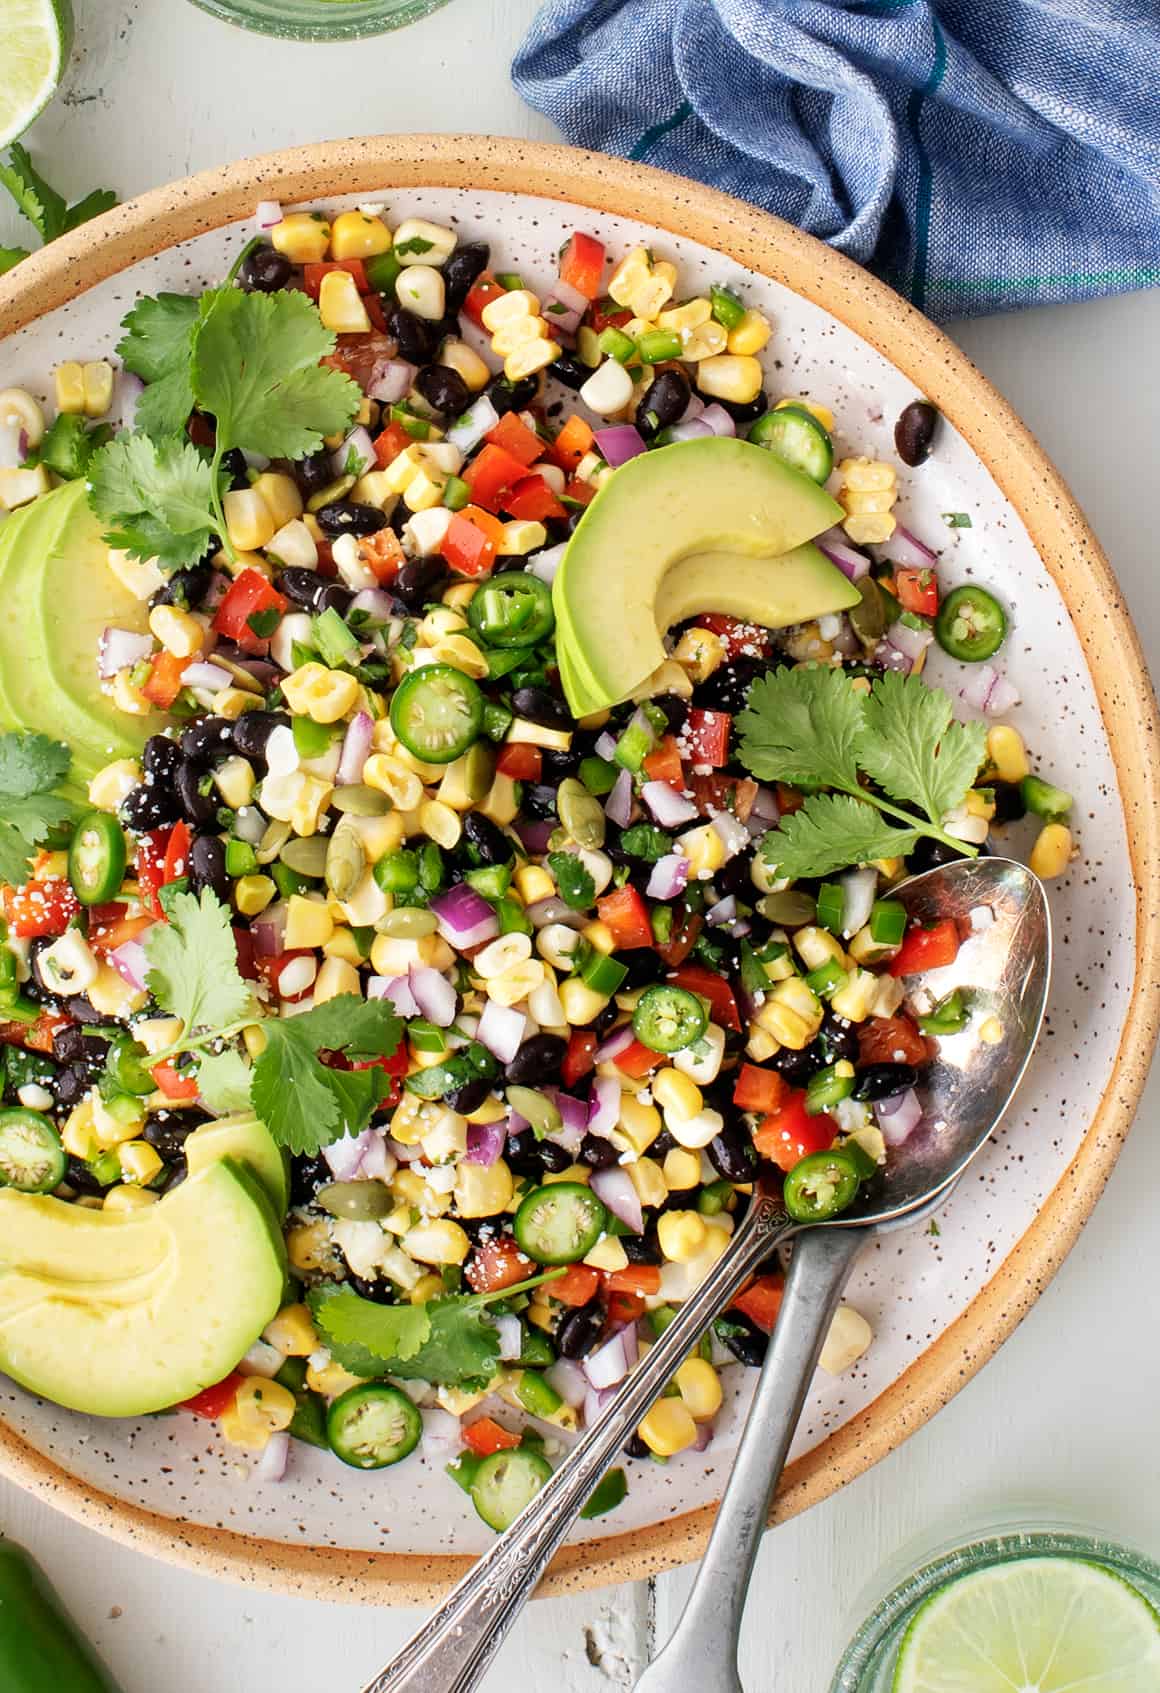 A bowl, vibrant and colorful, holds black beans and corn salad garnished with fresh slices of avocado, jalapeno, and cilantro.